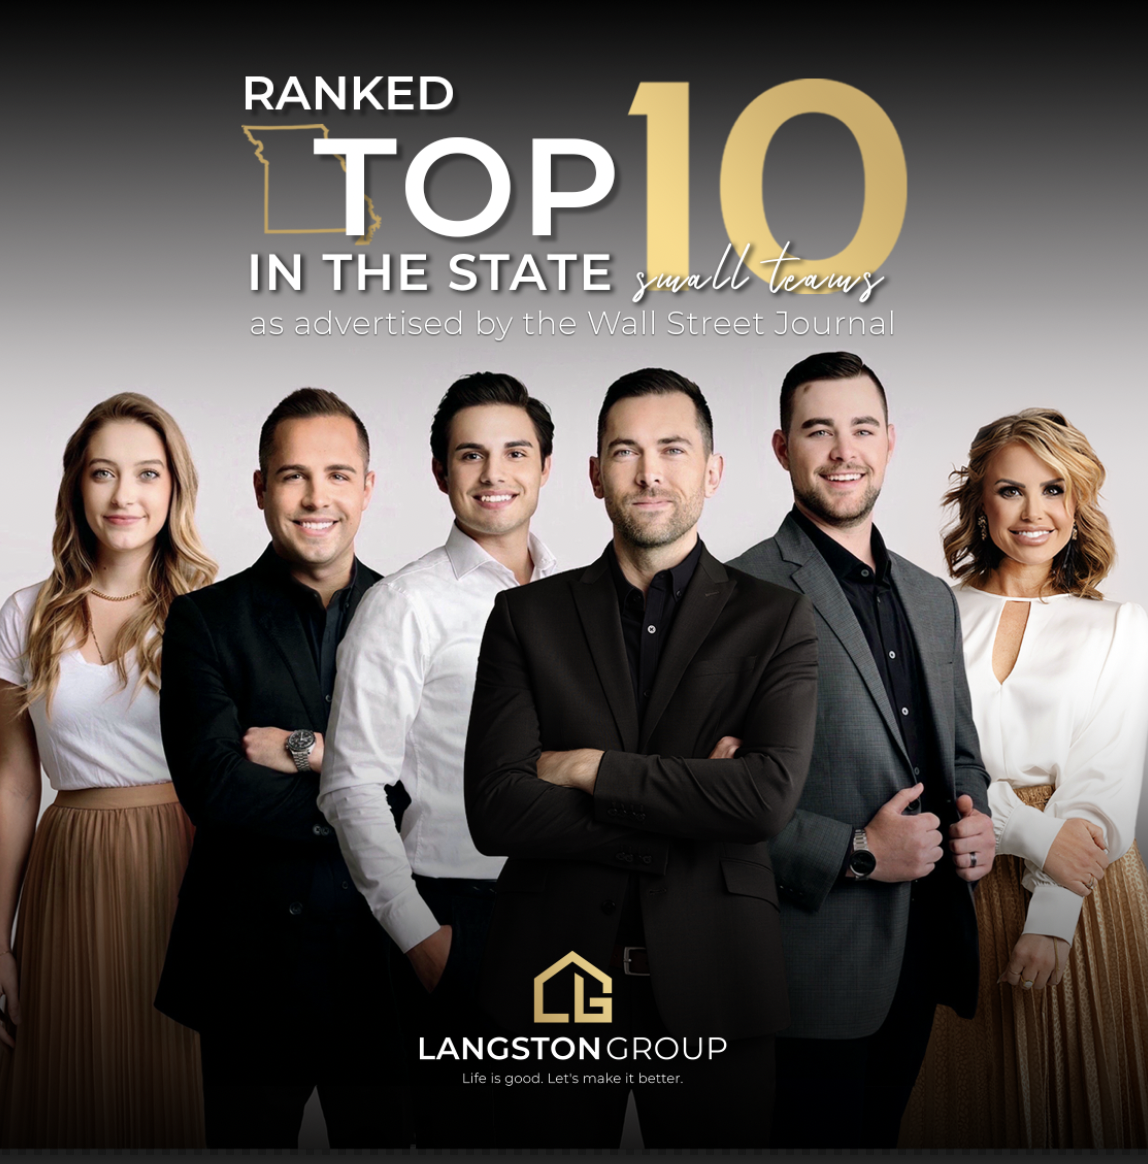 Langston Group Realtors Ranked in the Top 10 Amongst Small Teams in the Whole State of Missouri